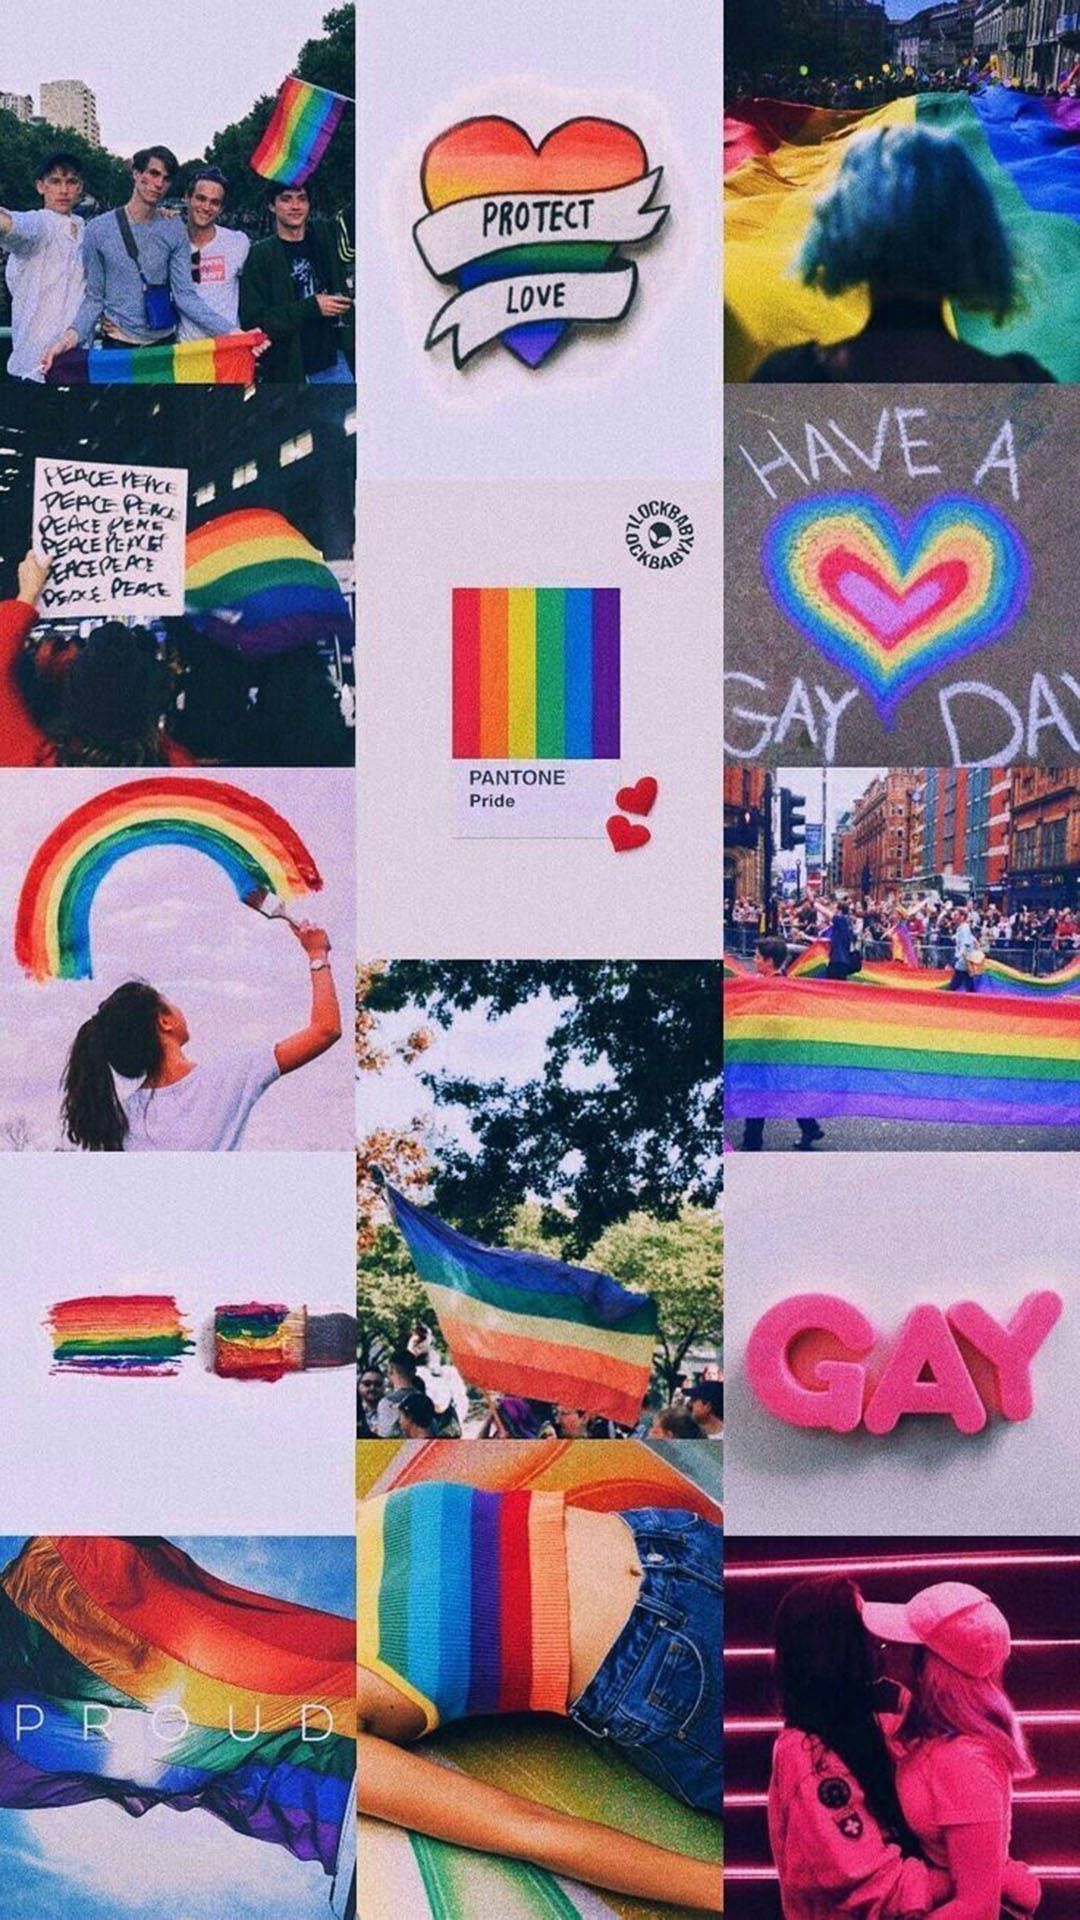 Collage of photos from the pride parade, including rainbows, people, and signs. - Pride, gay, LGBT